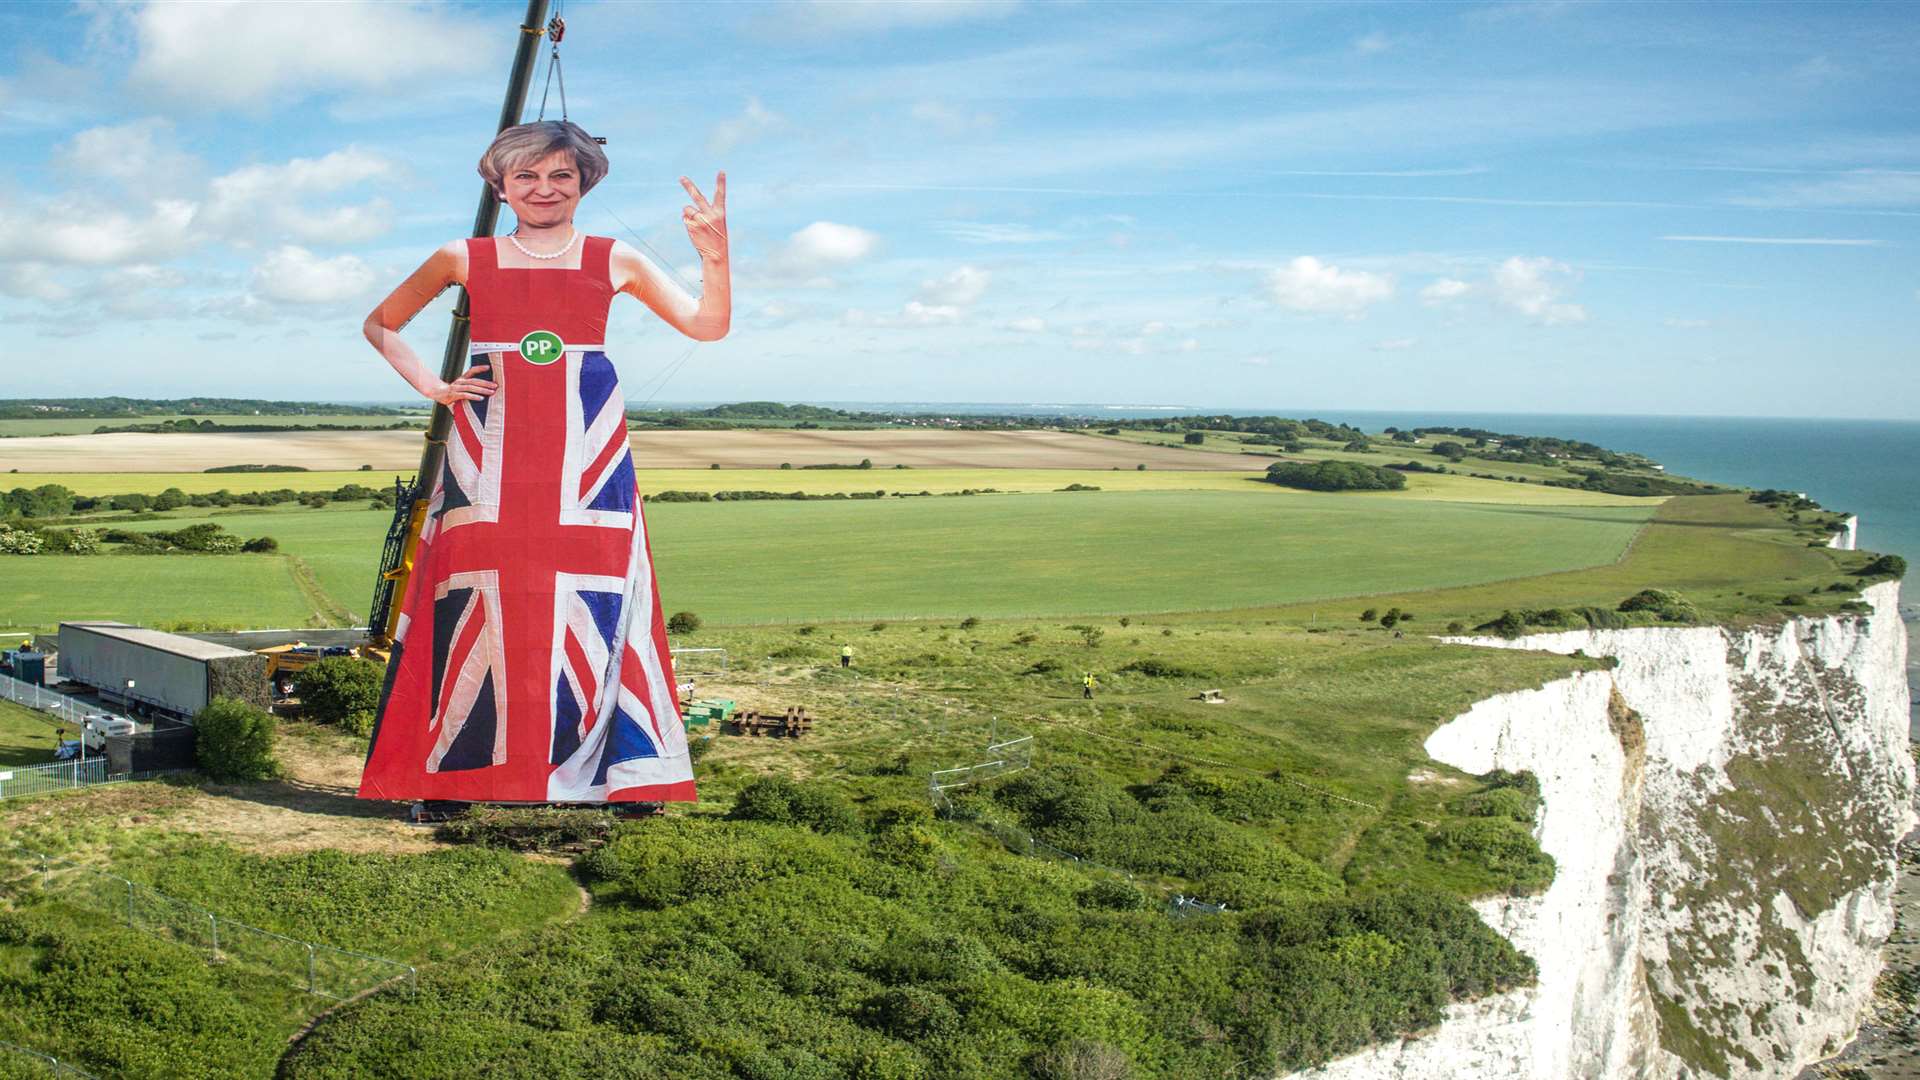 Now we know who was responsible for the huge Theresa May statue flicking the V sign over the White Cliffs of Dover